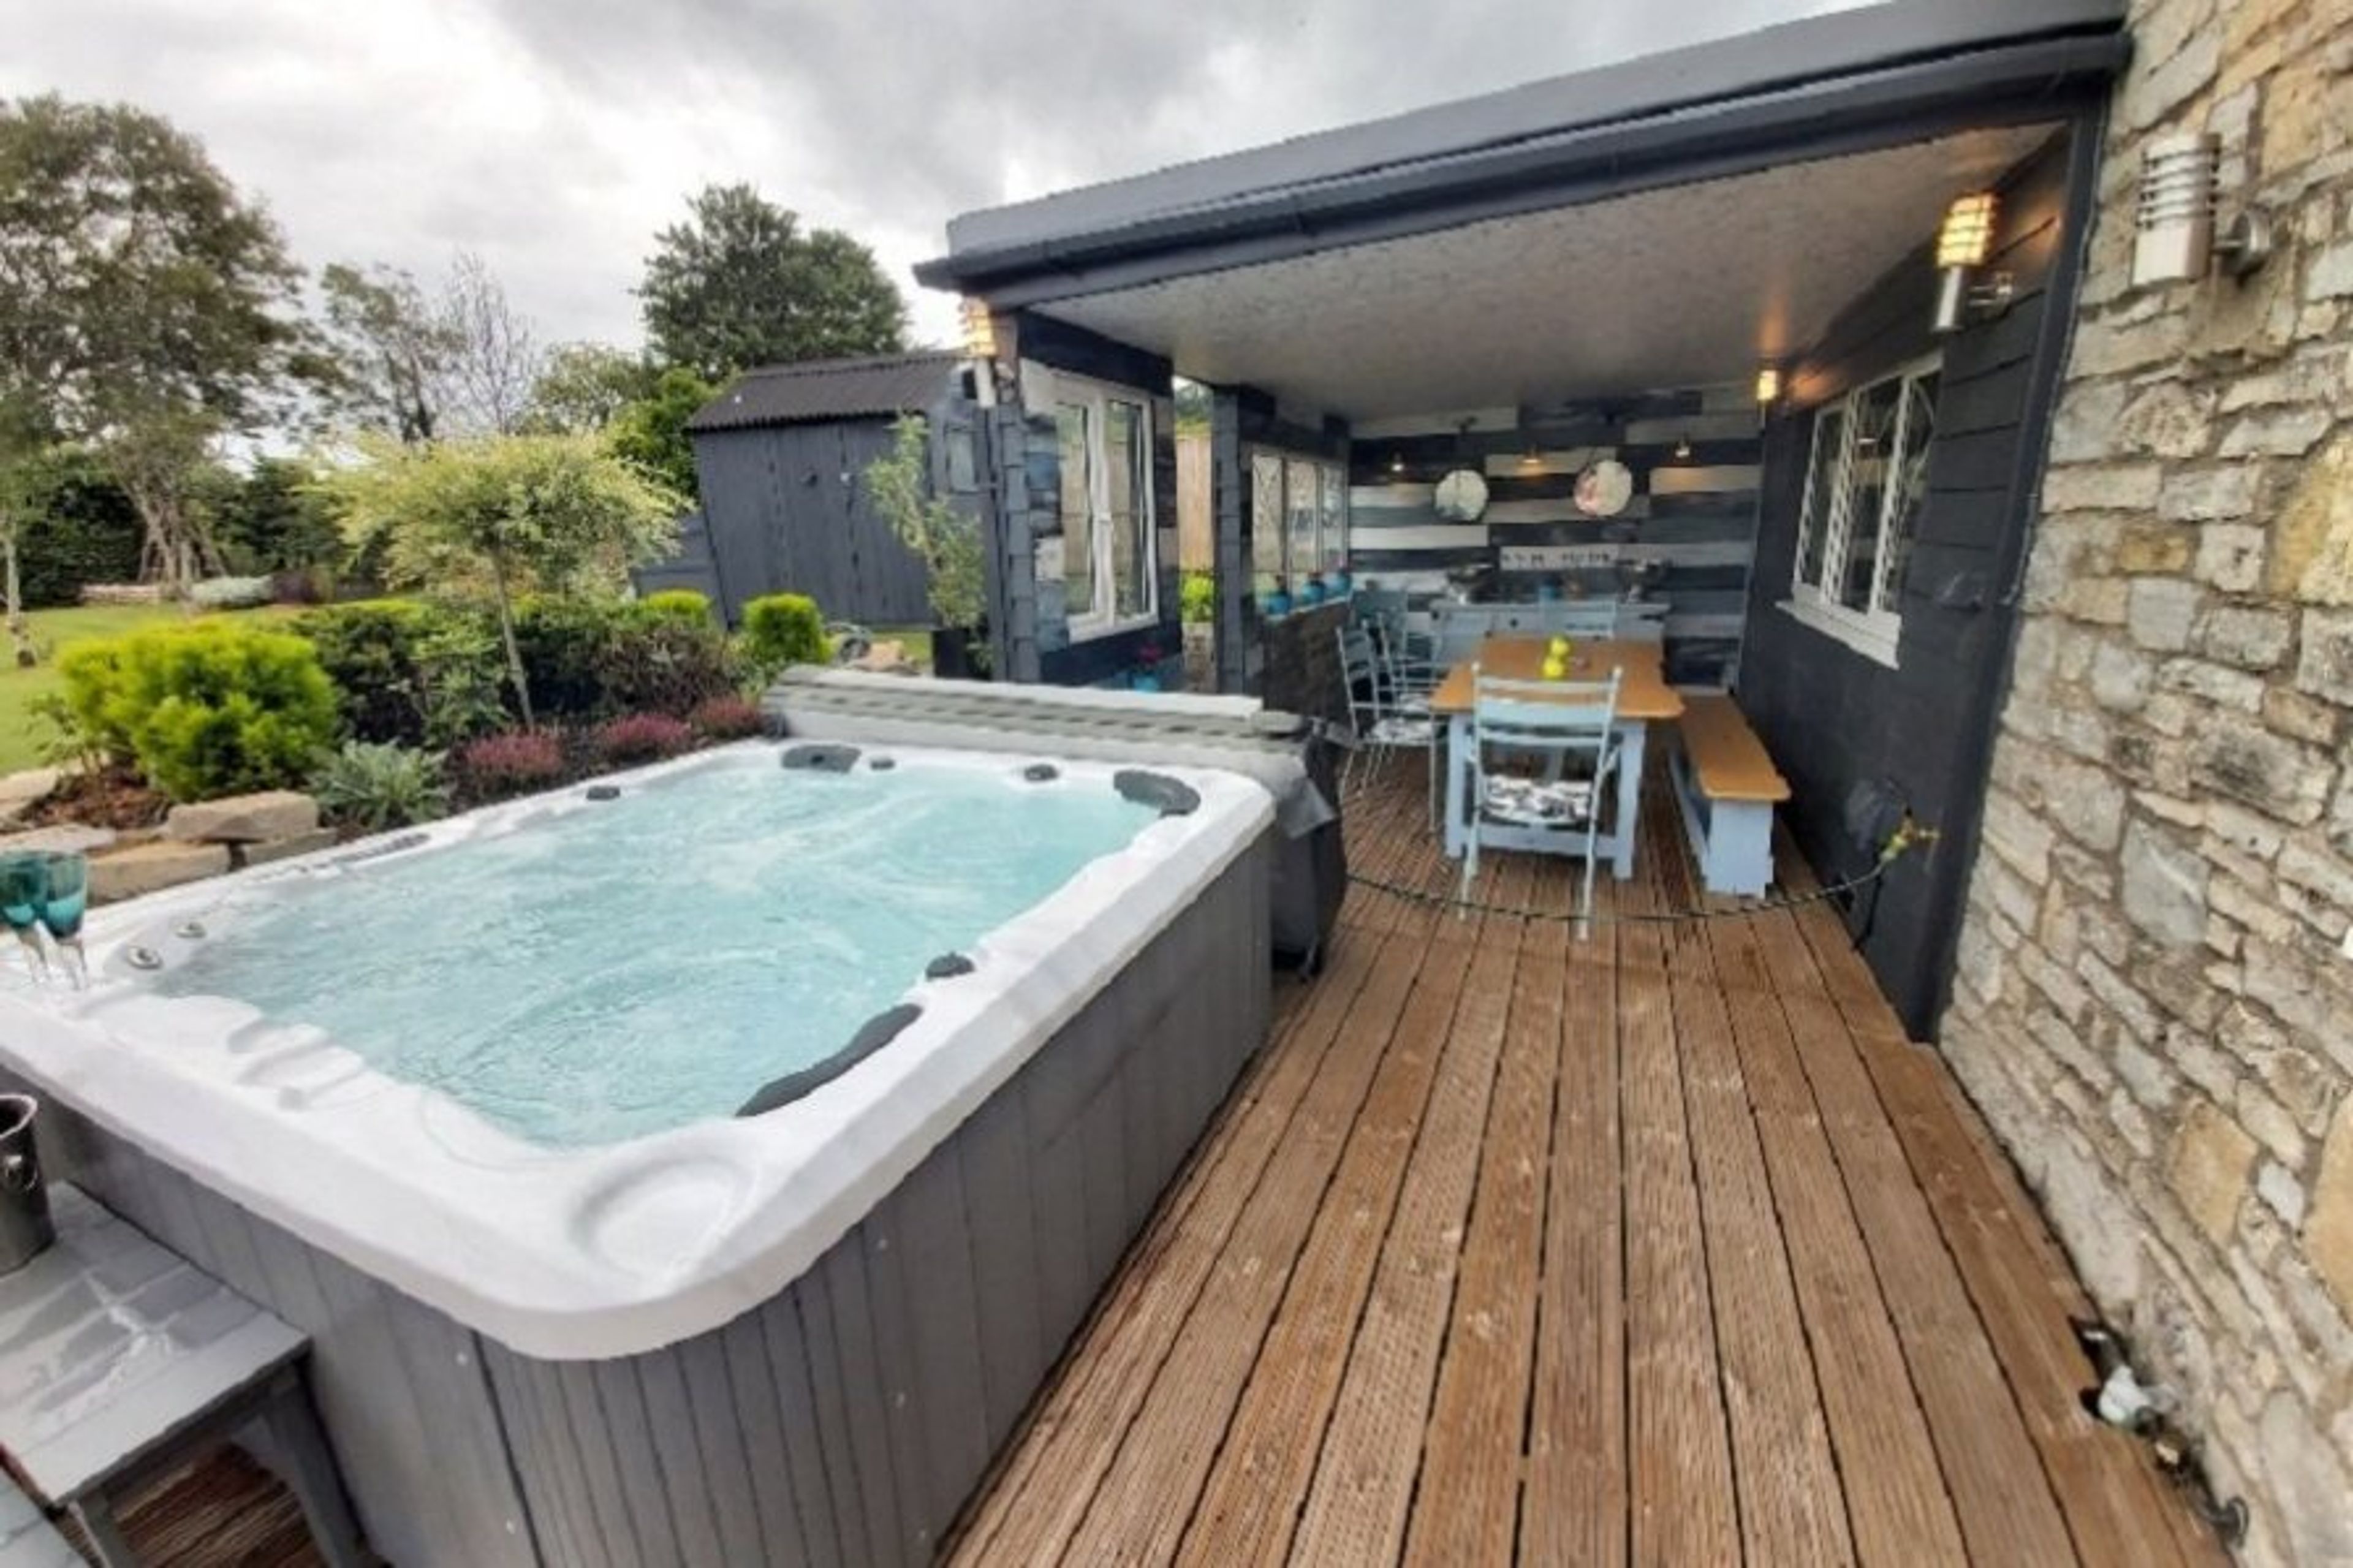 Outside the back door, nice and secluded hot tub and Alfresco dining.